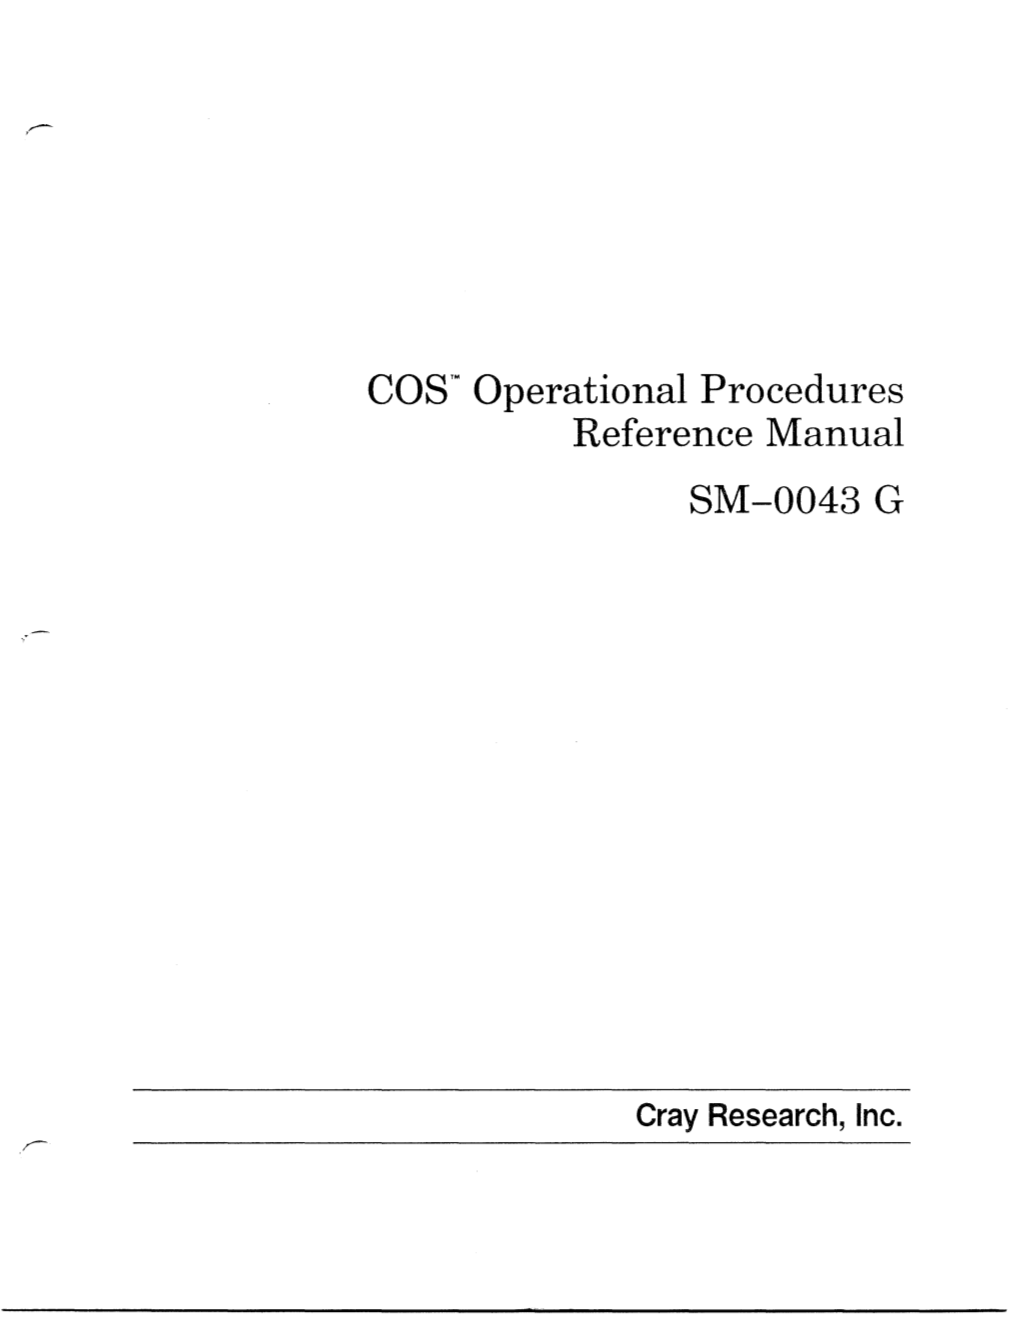 COS'· Operational Procedures Reference Manual SM-0043 G